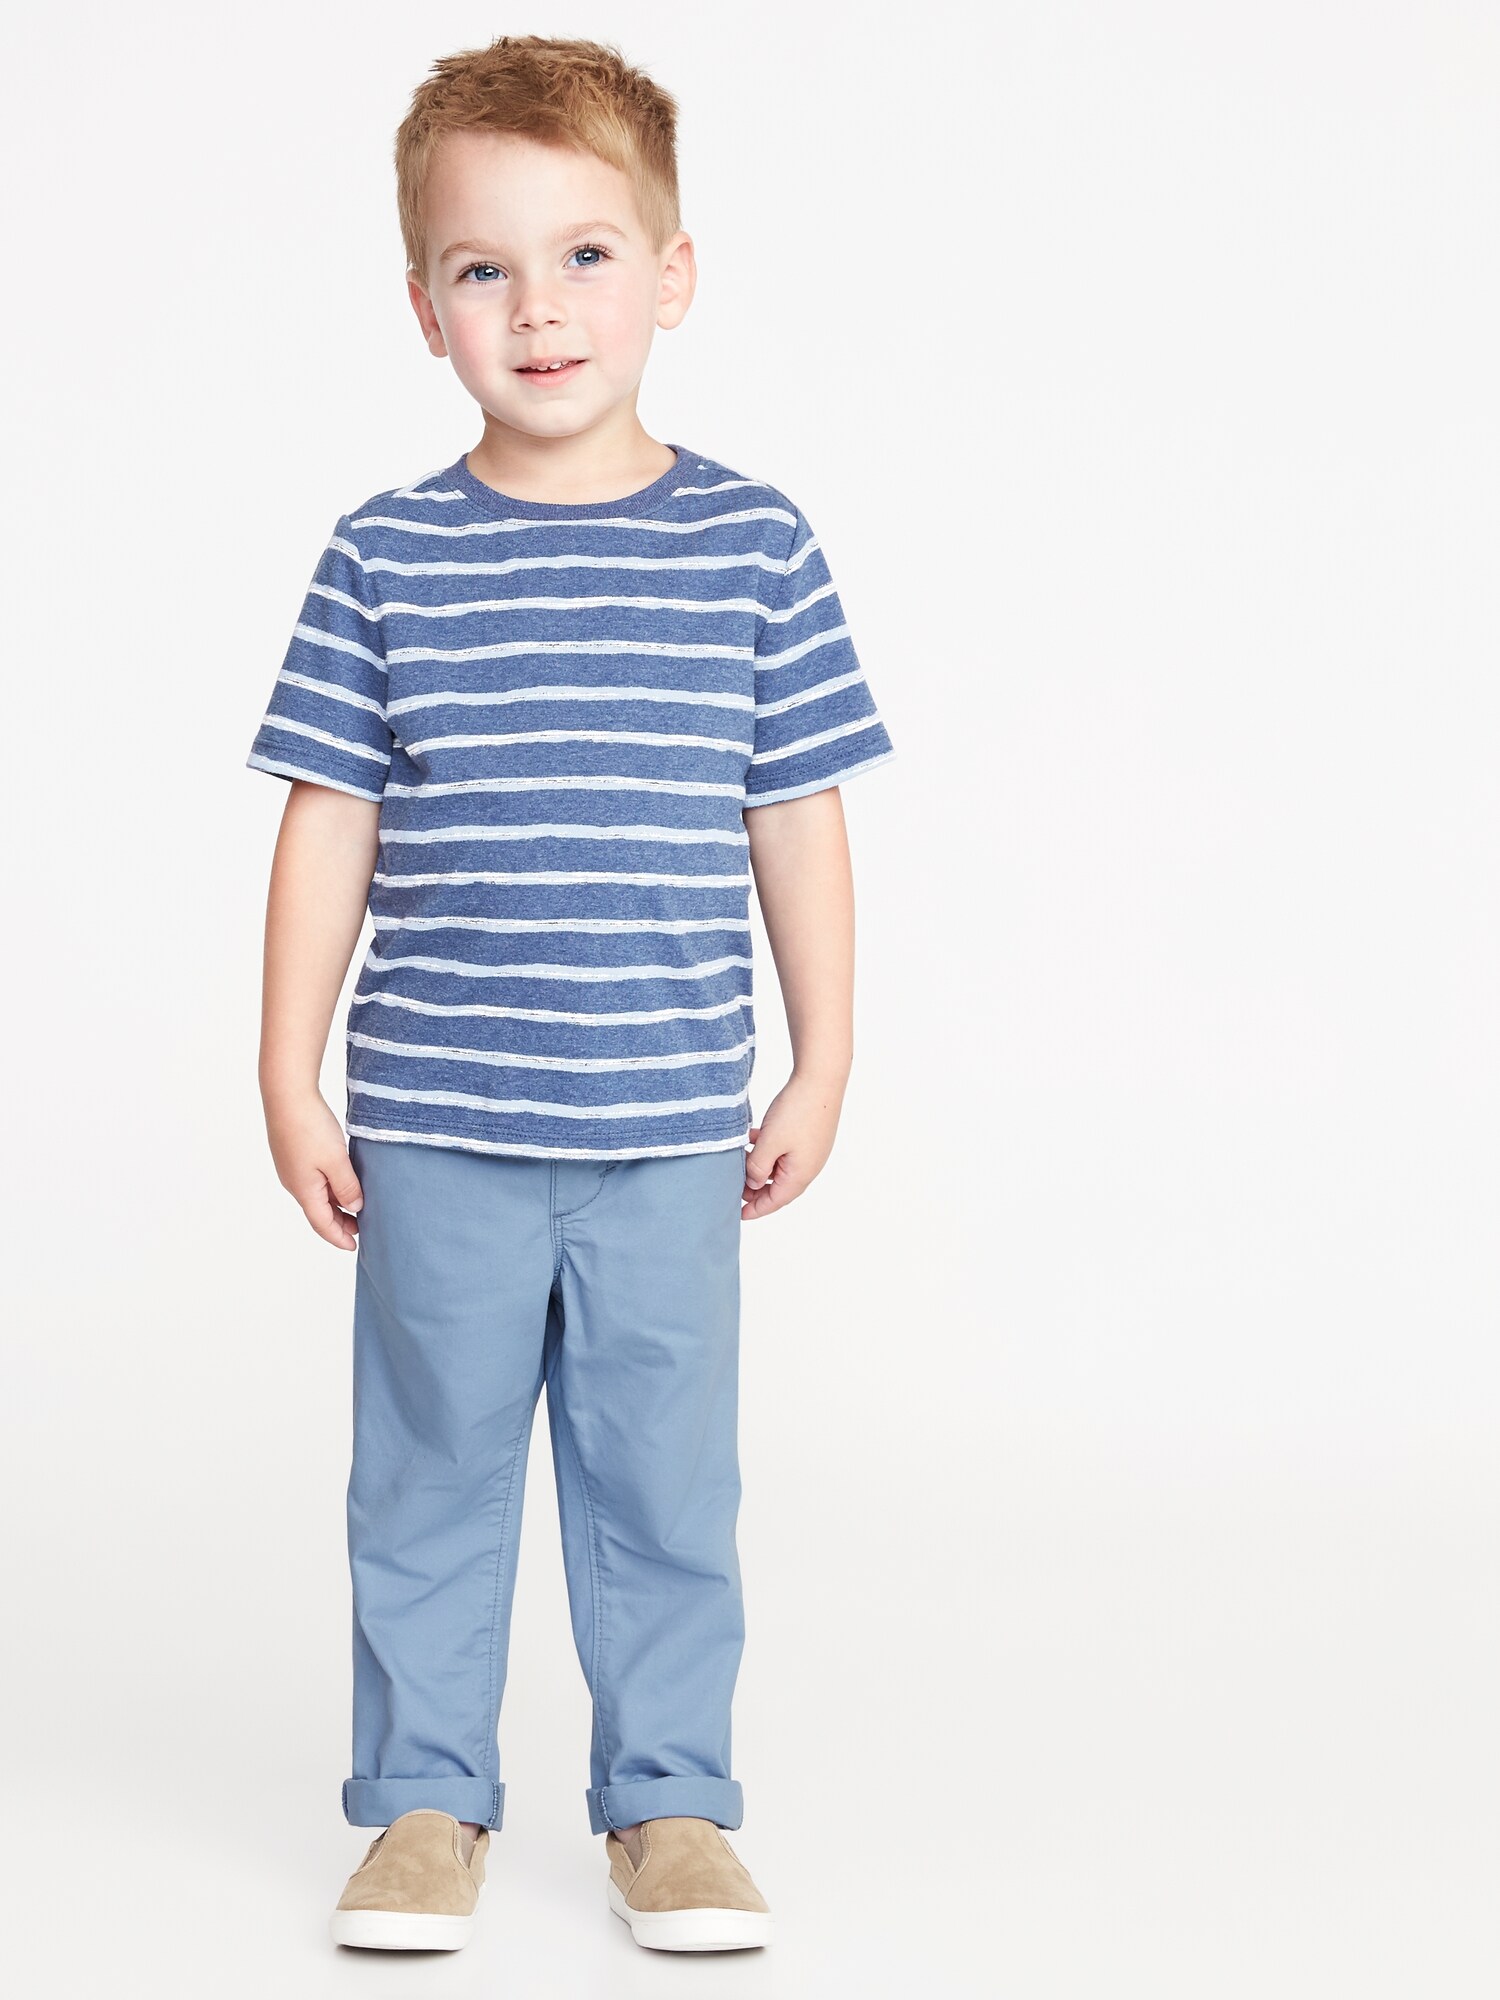 Relaxed Pull-On Anytime Chinos for Toddler Boys | Old Navy